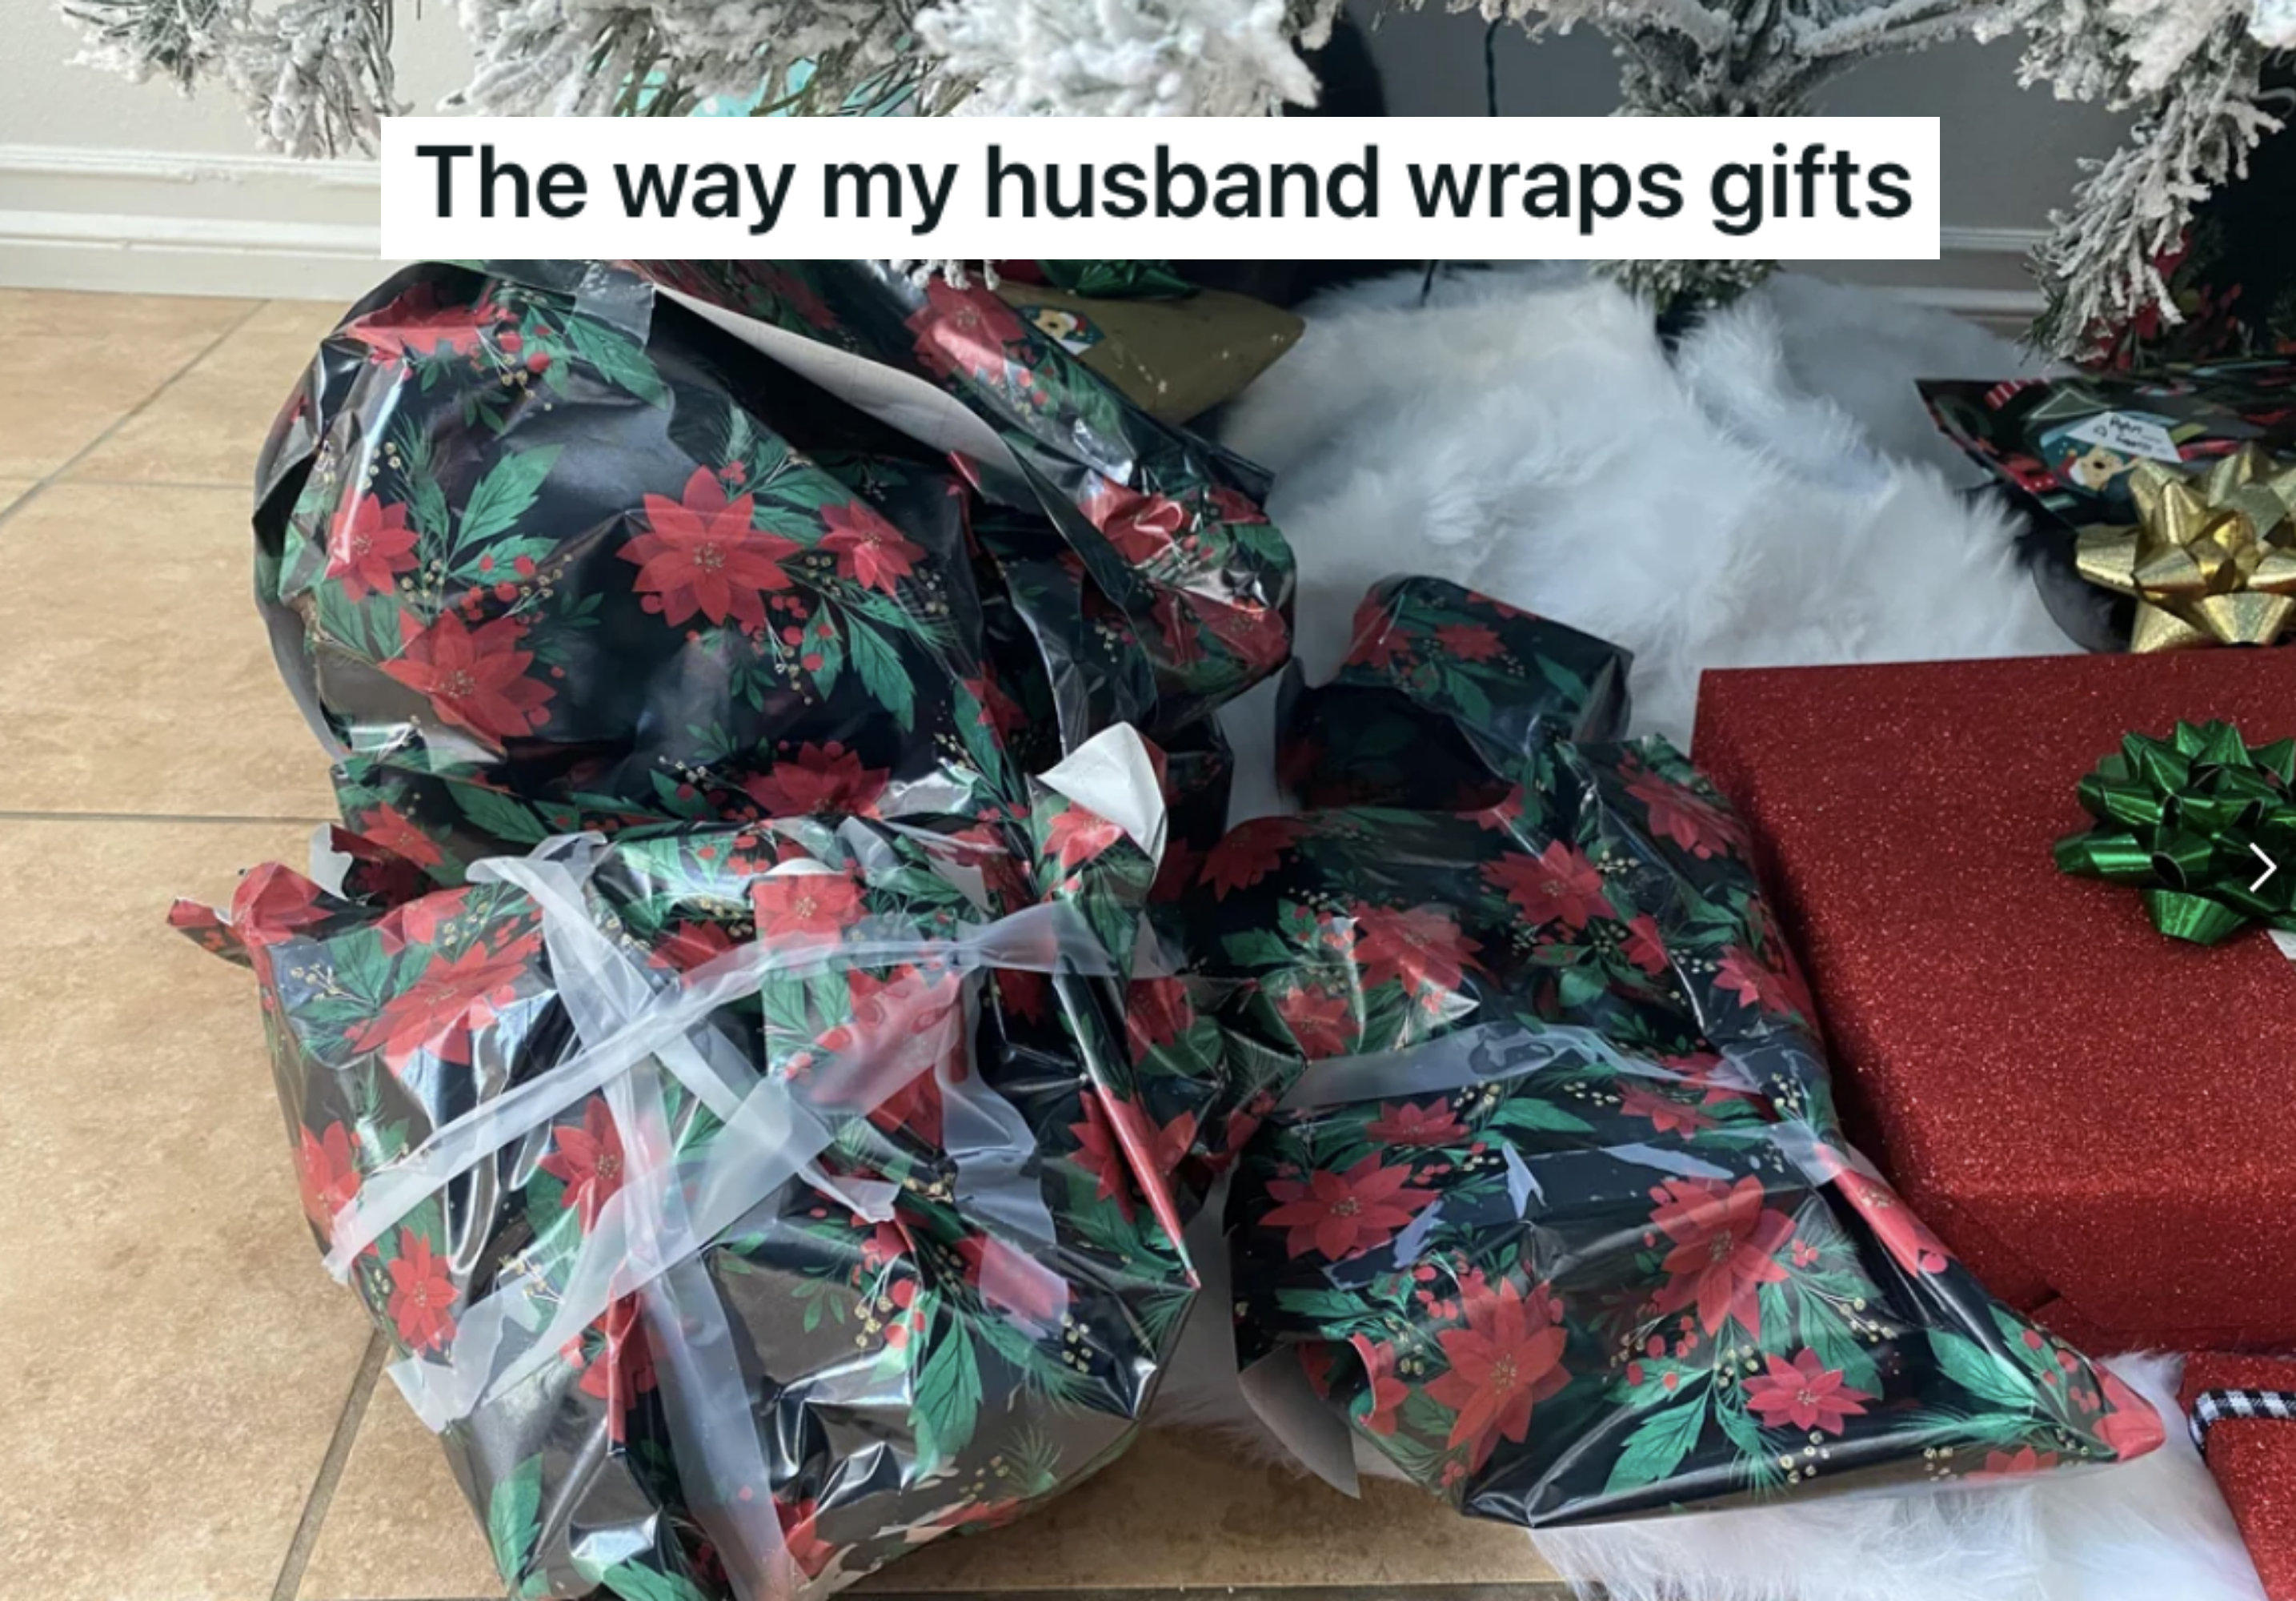 badly wrapped presents under a Christmas tree